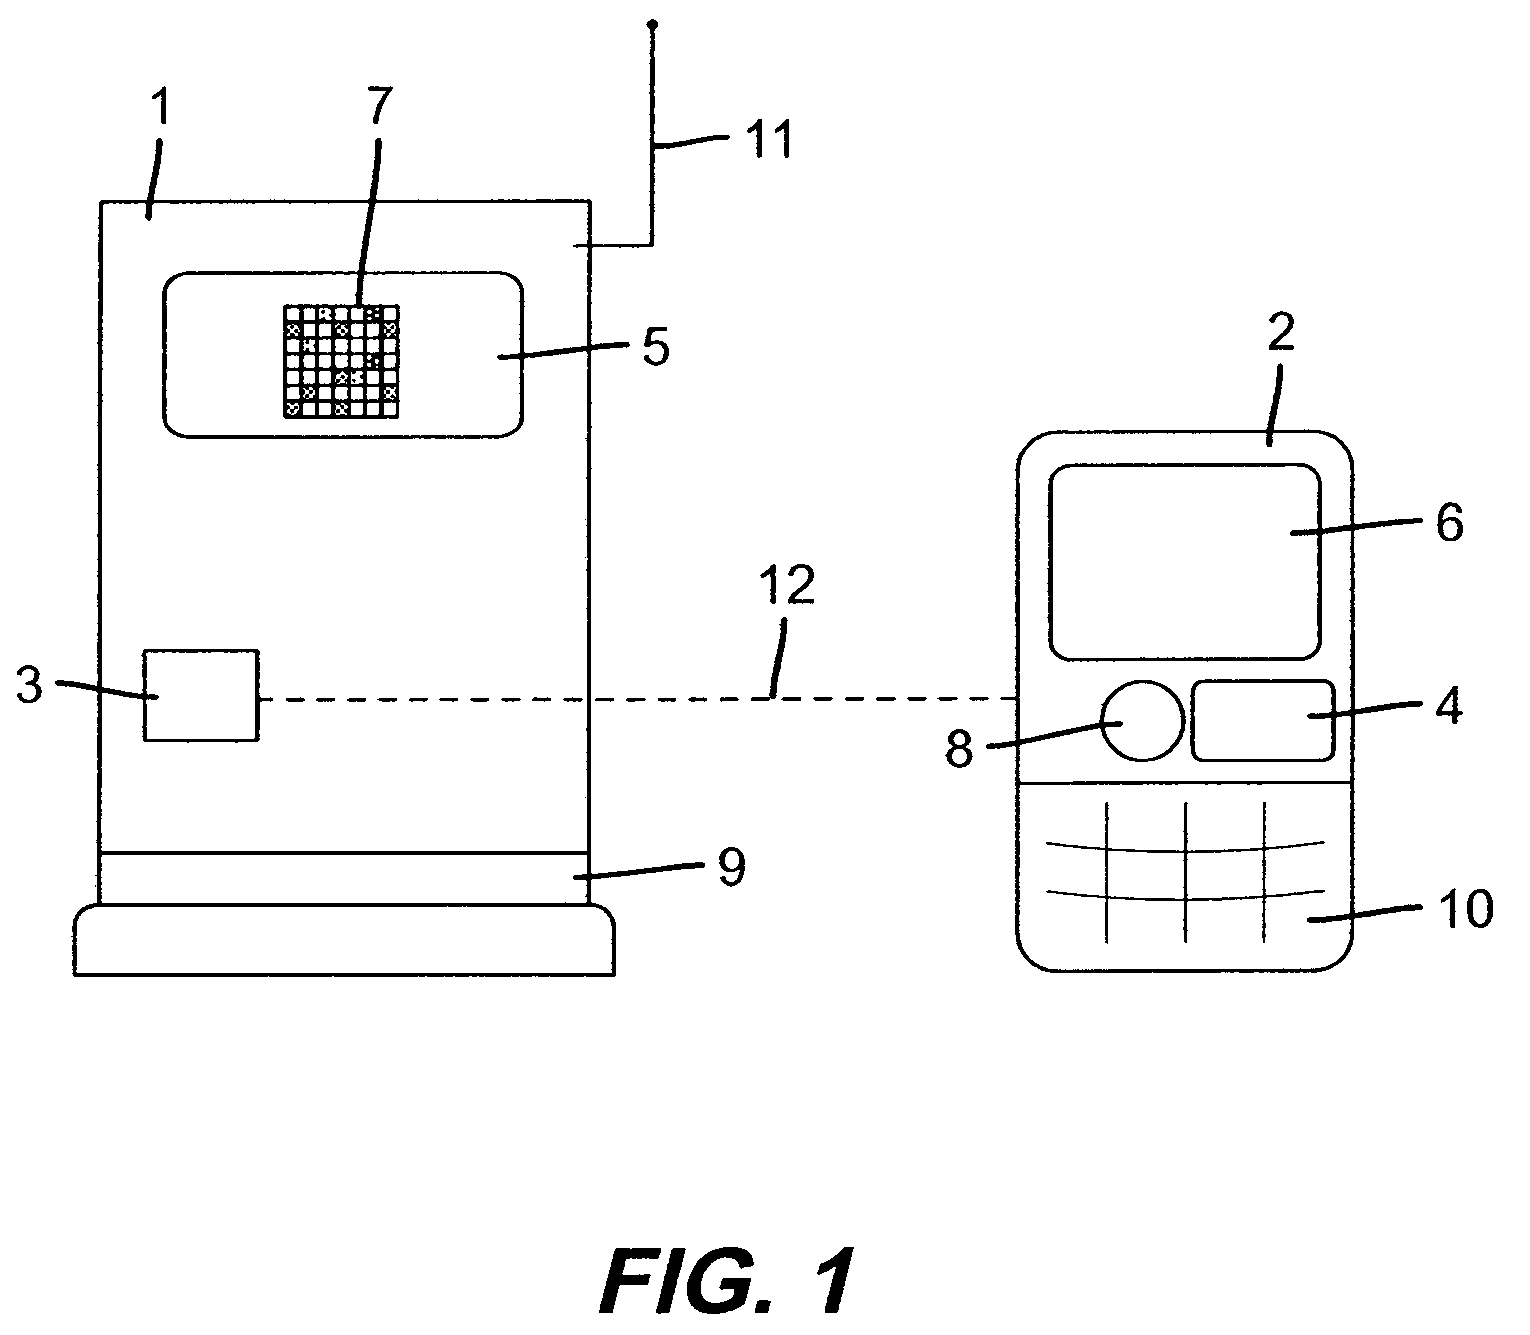 Process and system for automatically updating data recorded in a radio frequency identifier